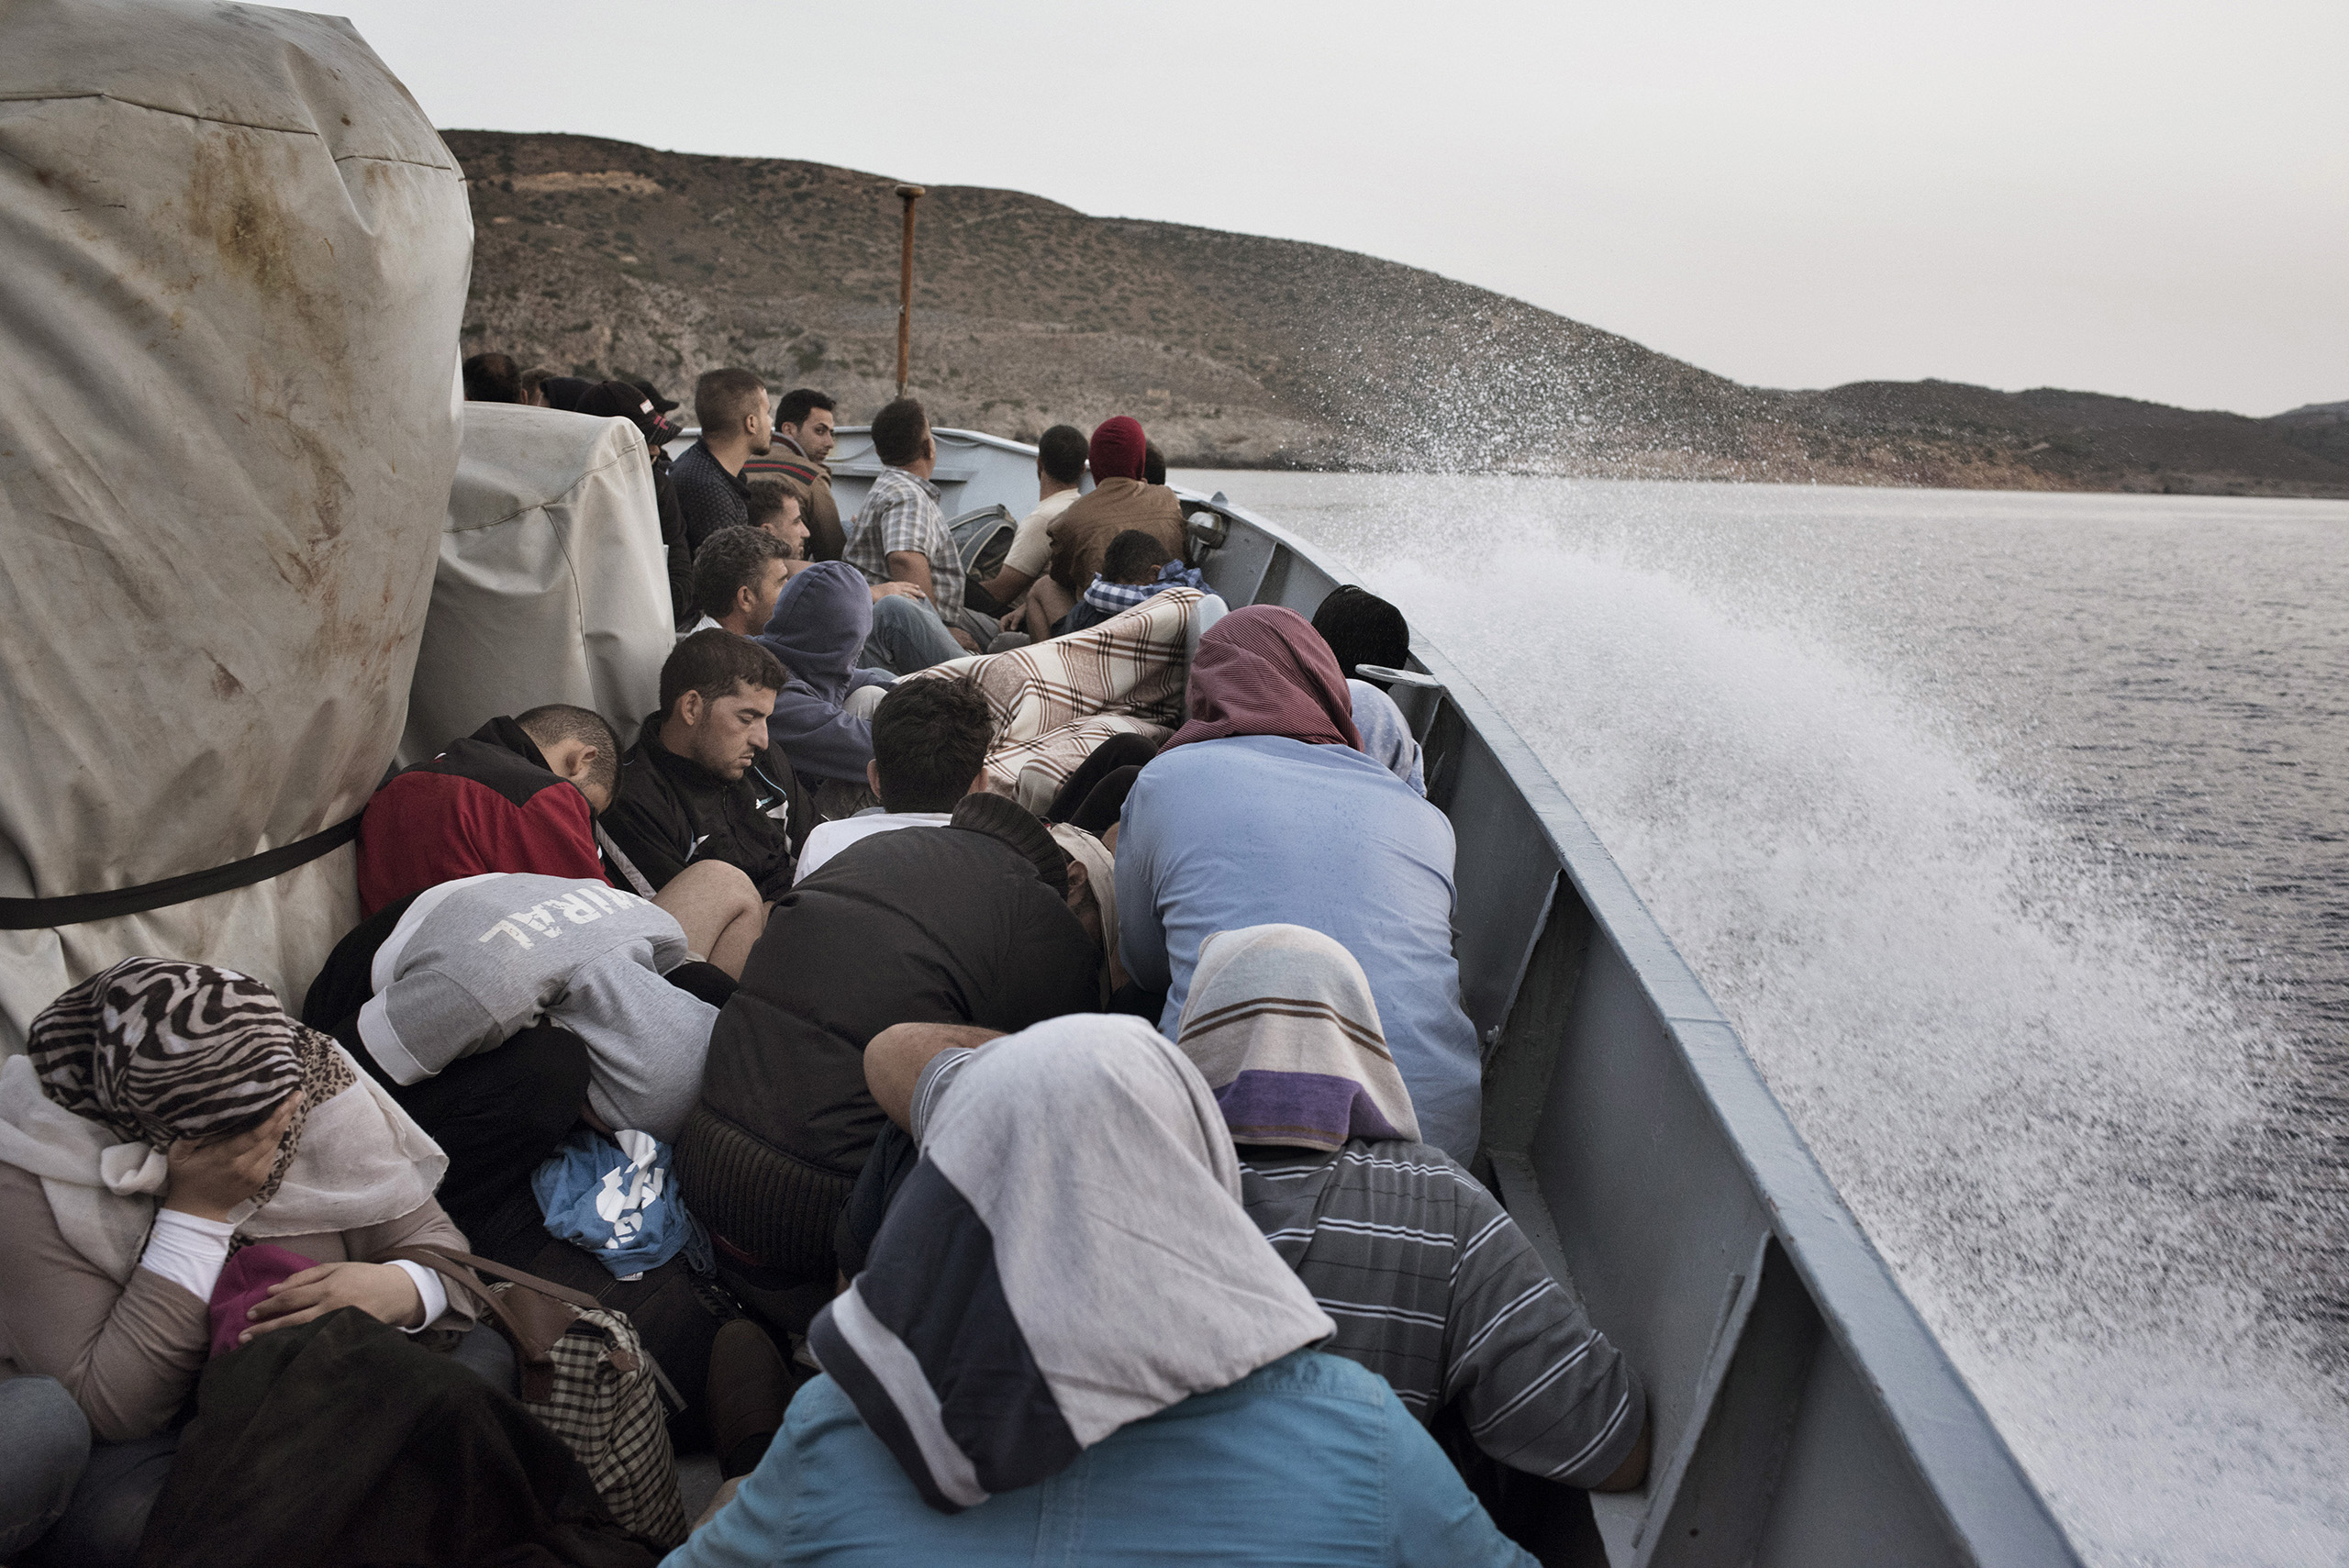 Syrian migrants are taken to Greece aboard a Greek coast guard vessel after it rescued them from waters near the Greek-Turkish border. Sept. 7, 2015.